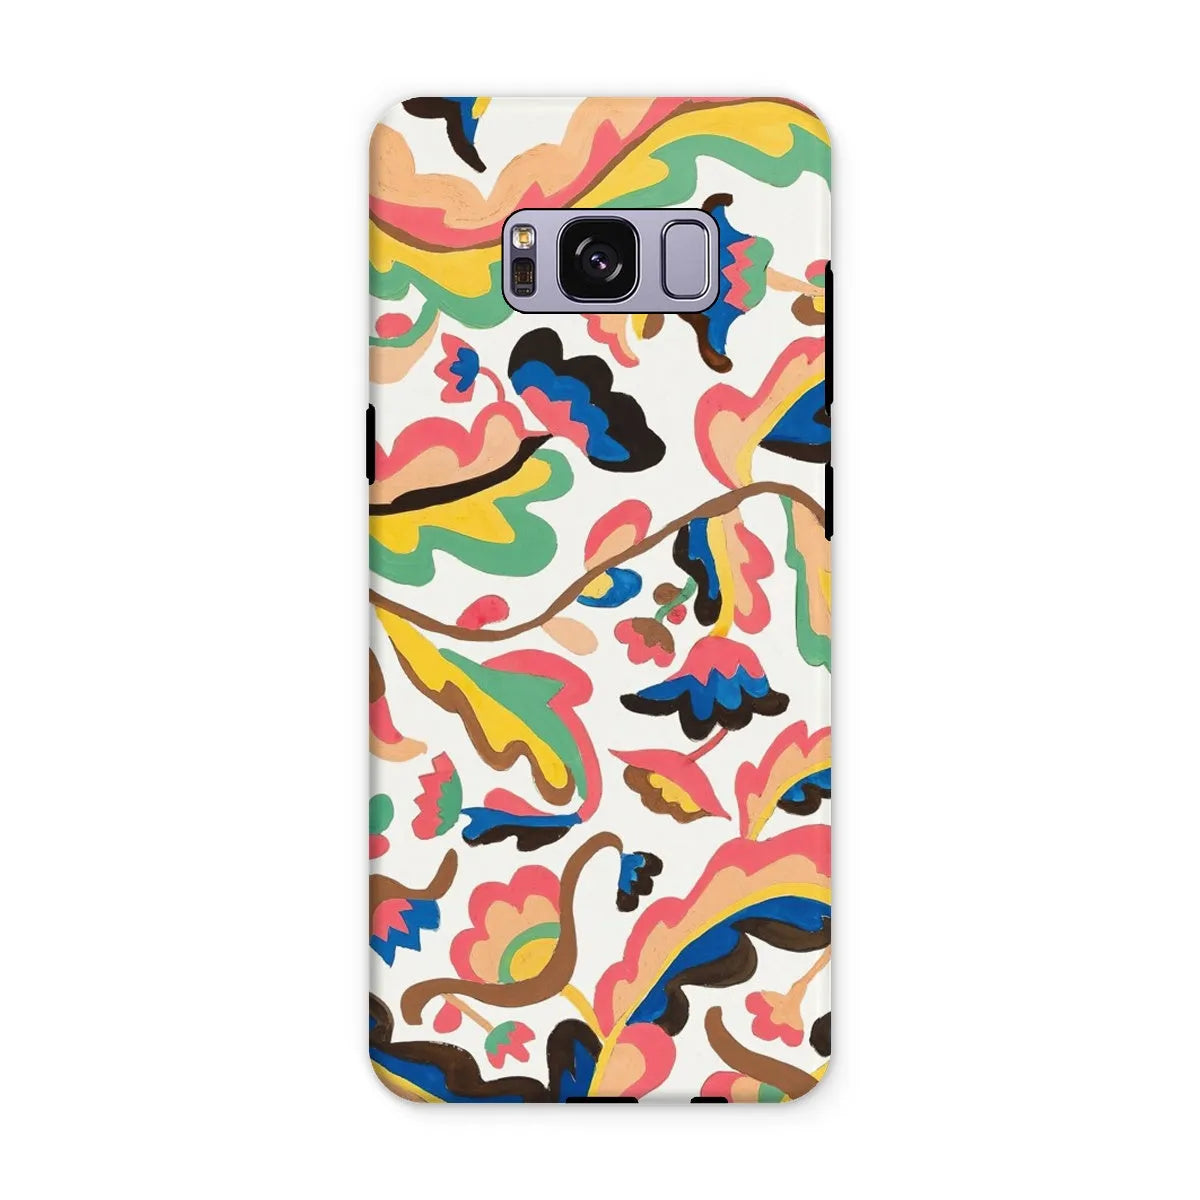 Colcha Floral Aesthetic Pattern Phone Case - Etna Wiswall - Samsung Galaxy S8 Plus / Matte - Mobile Phone Cases